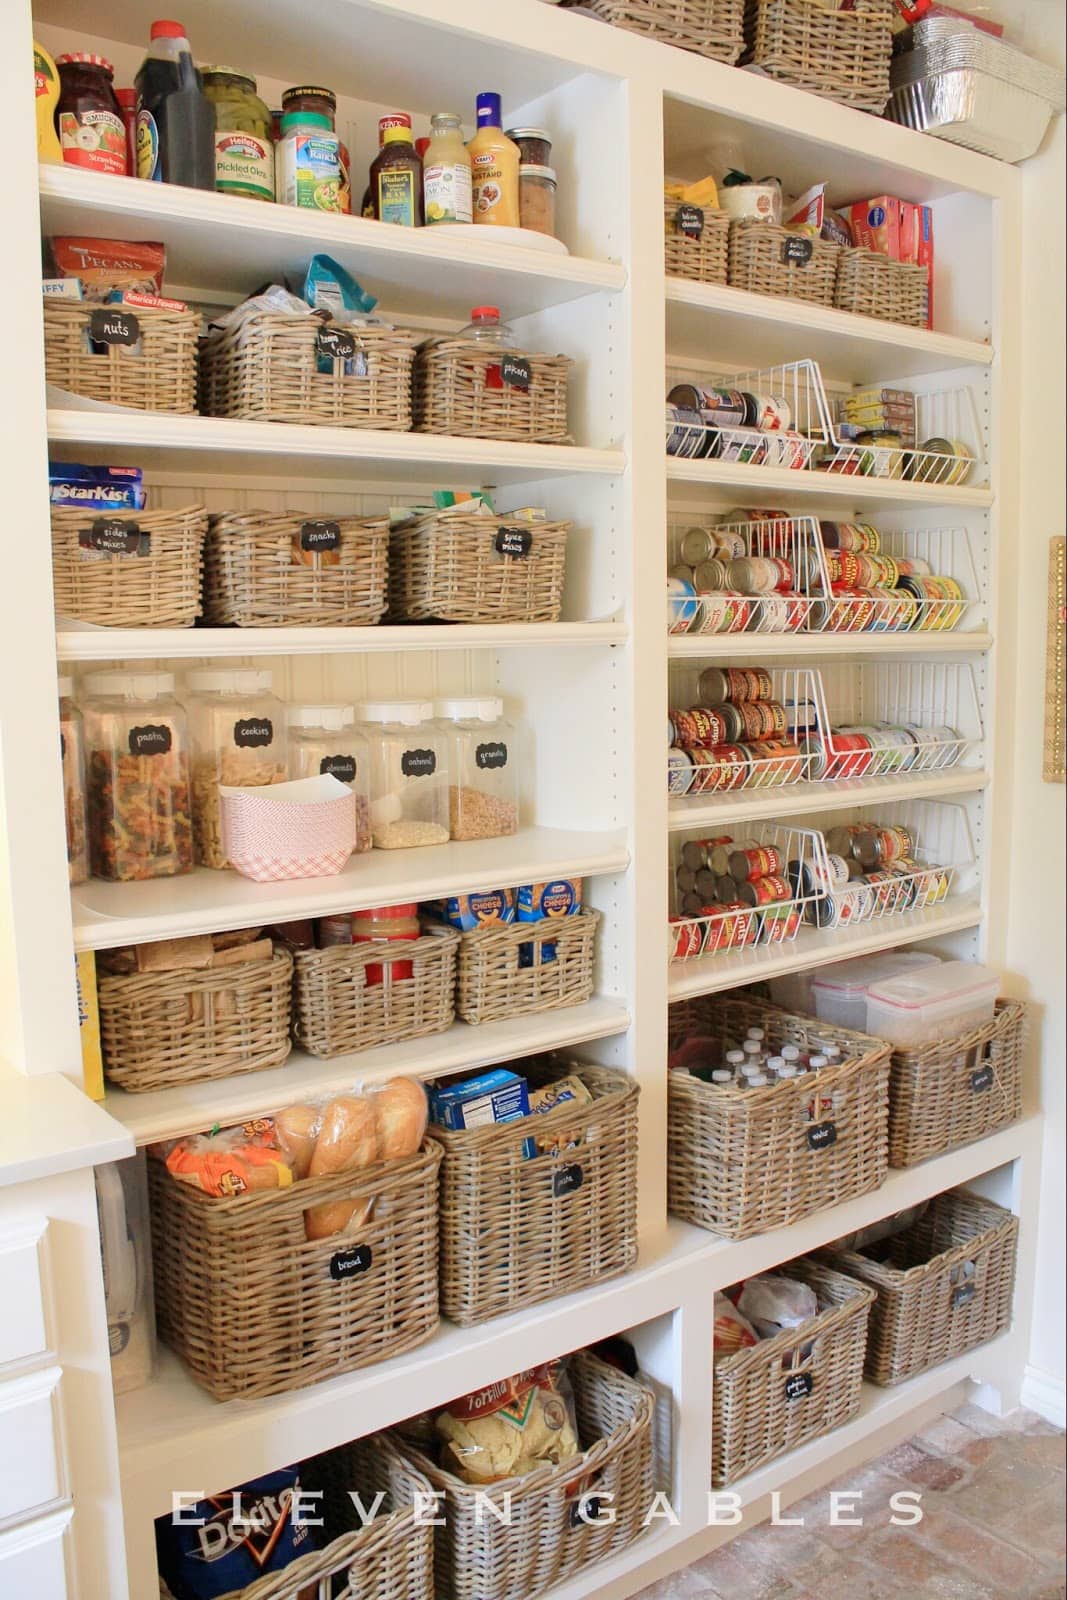 canned good storage using metal baskets and baskets for larger items.